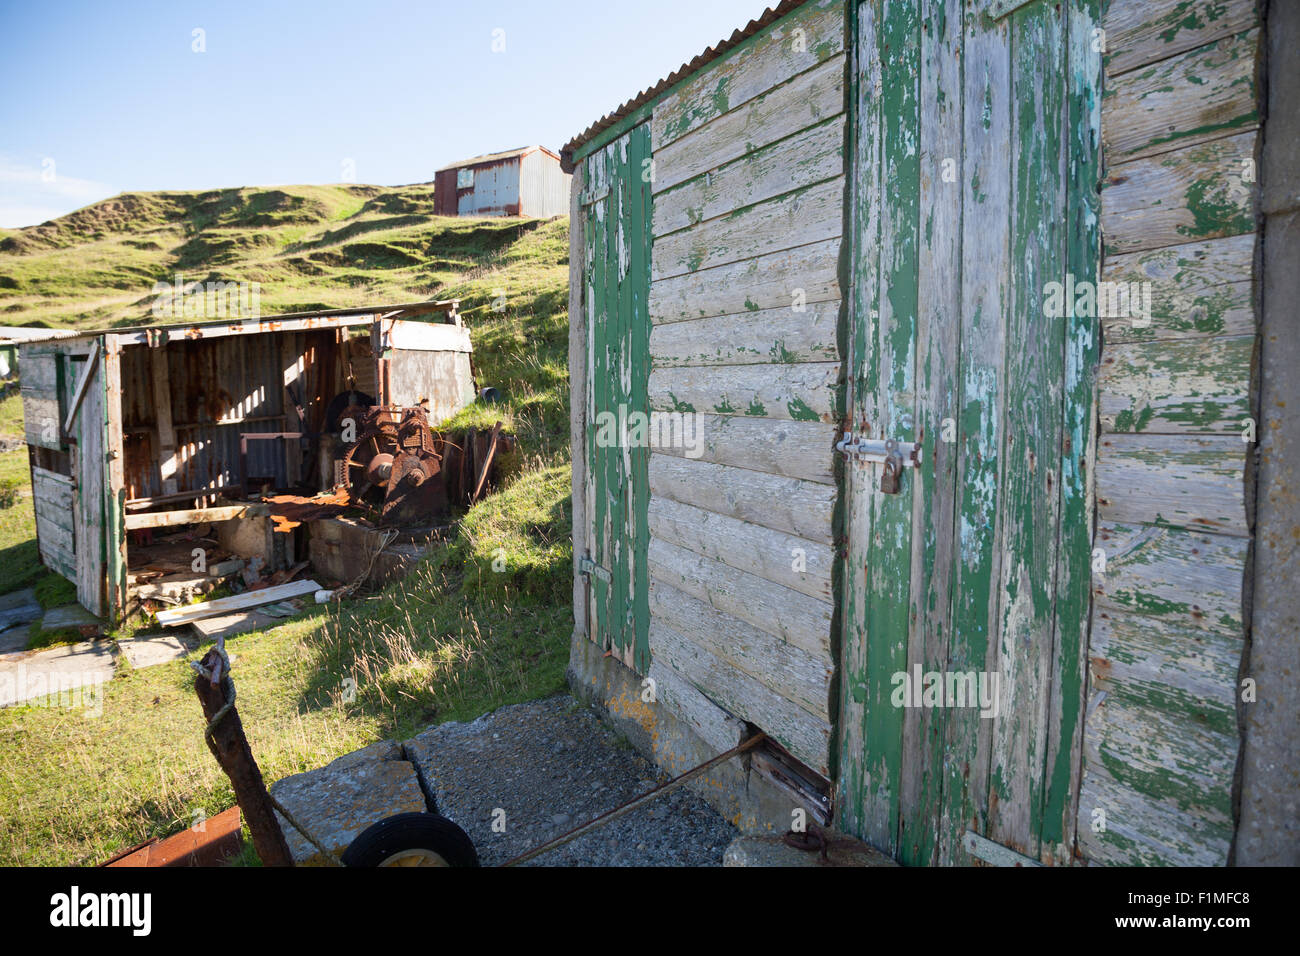 Abandoned fishing hut at Porth Ysgaden, Tudweiliog, Llyn Peninsula, North Wales with missing side and wooden cladding Stock Photo